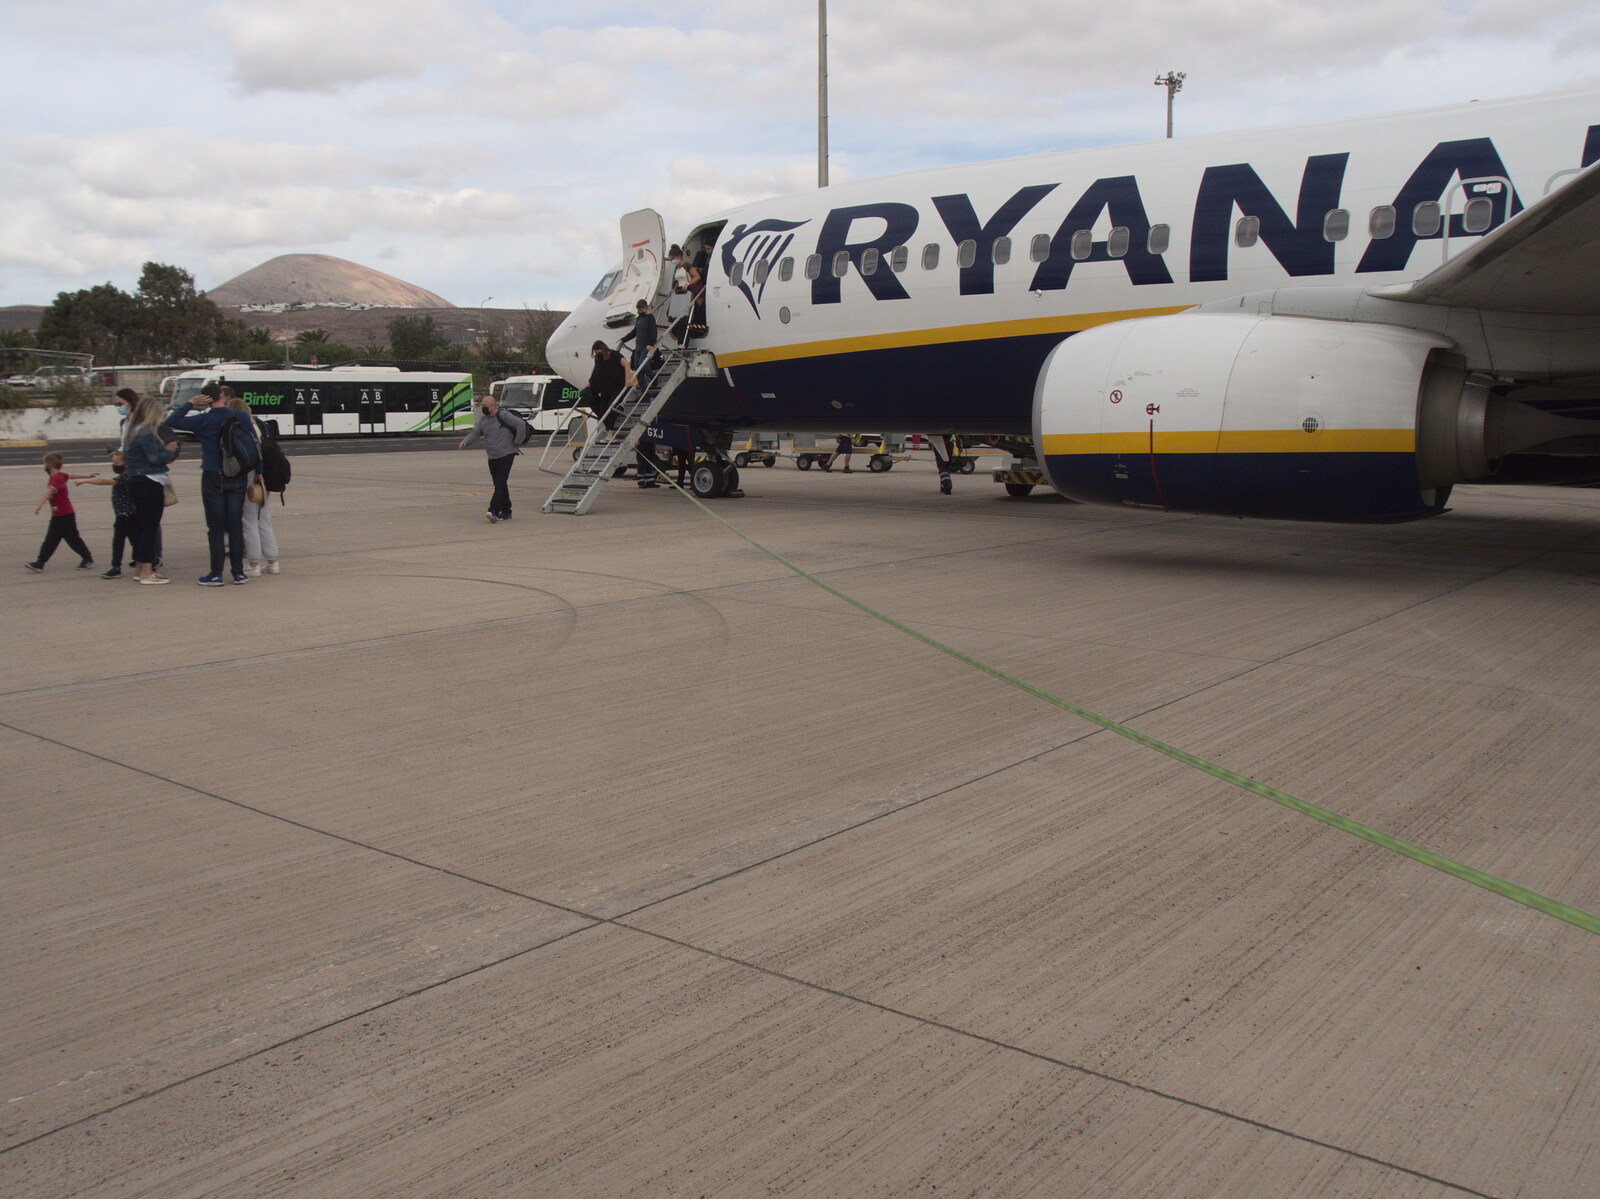 We're finally on the ground at Lanzarote from Five Days in Lanzarote, Canary Islands, Spain - 24th October 2021